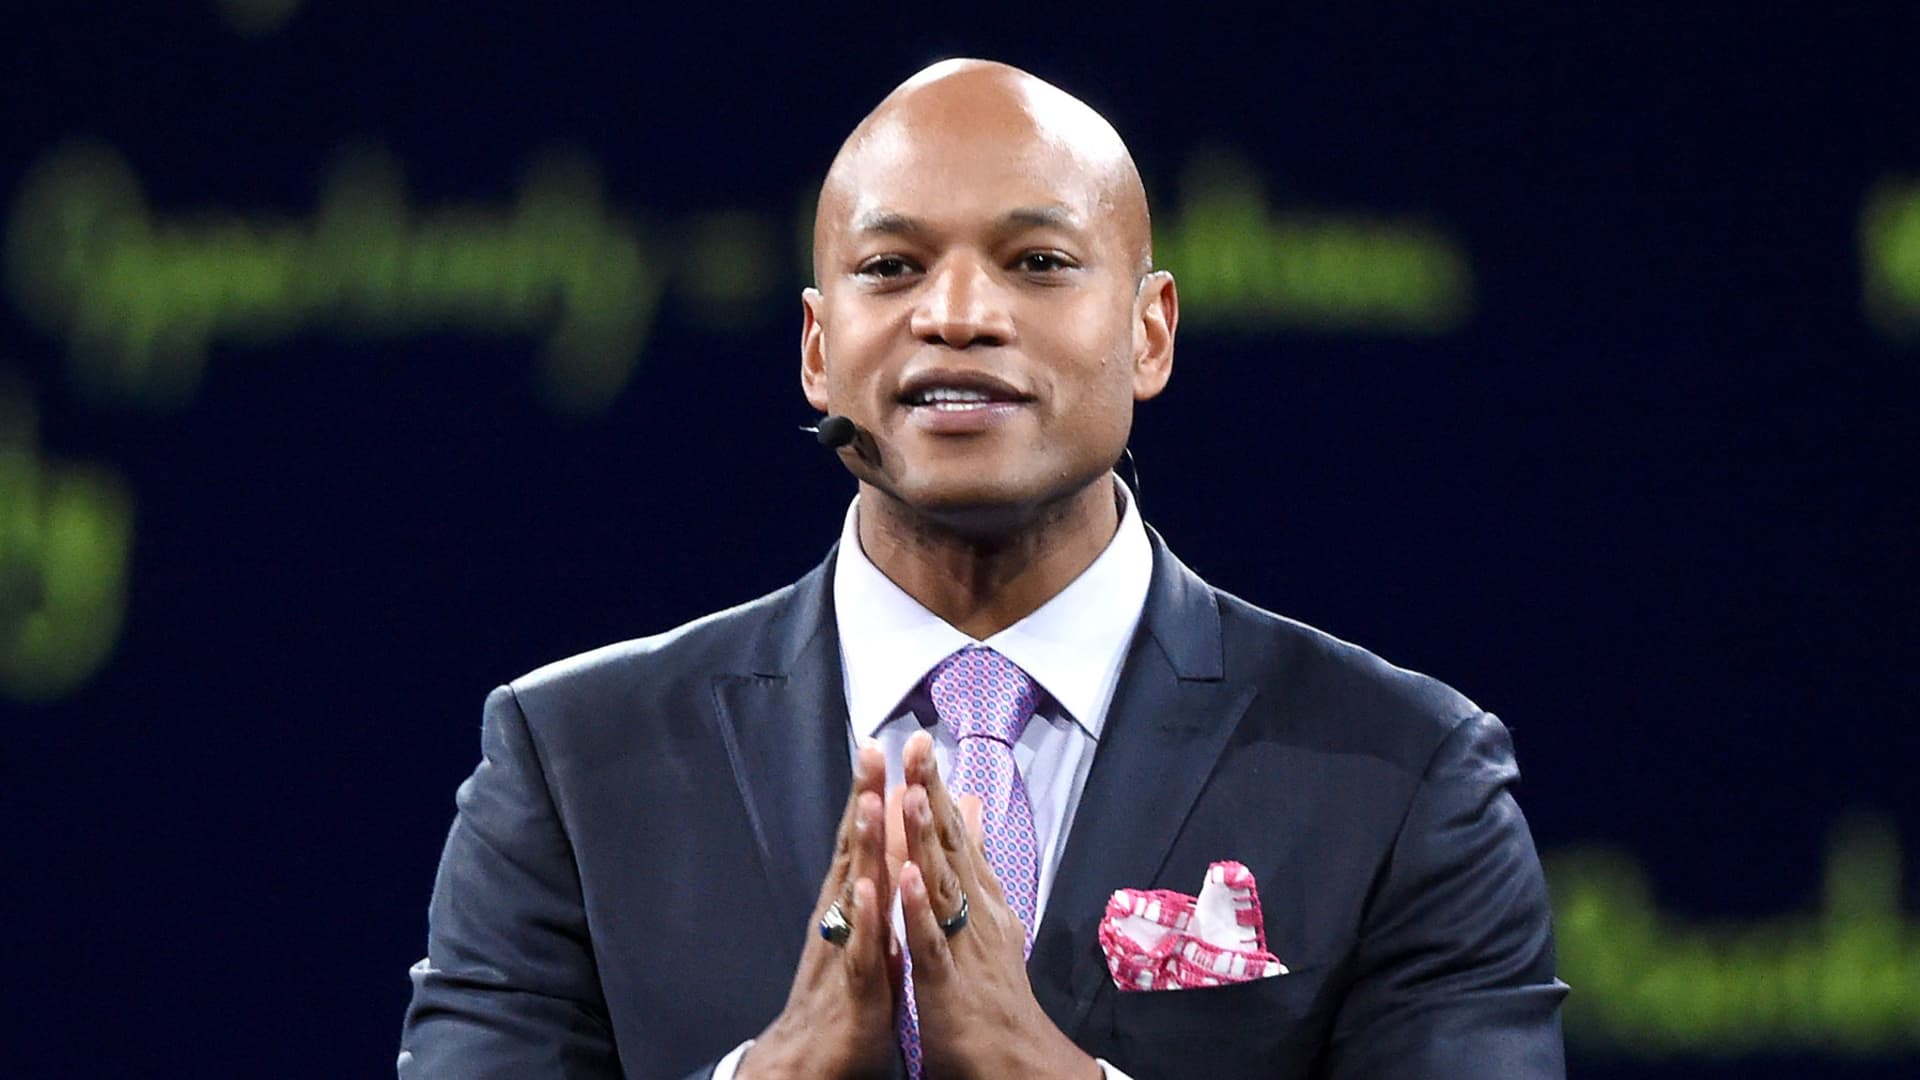 Robin Hood CEO Wes Moore speaks onstage during the Robin Hood Benefit 2019 at Jacob Javitz Center on May 13, 2019 in New York City.